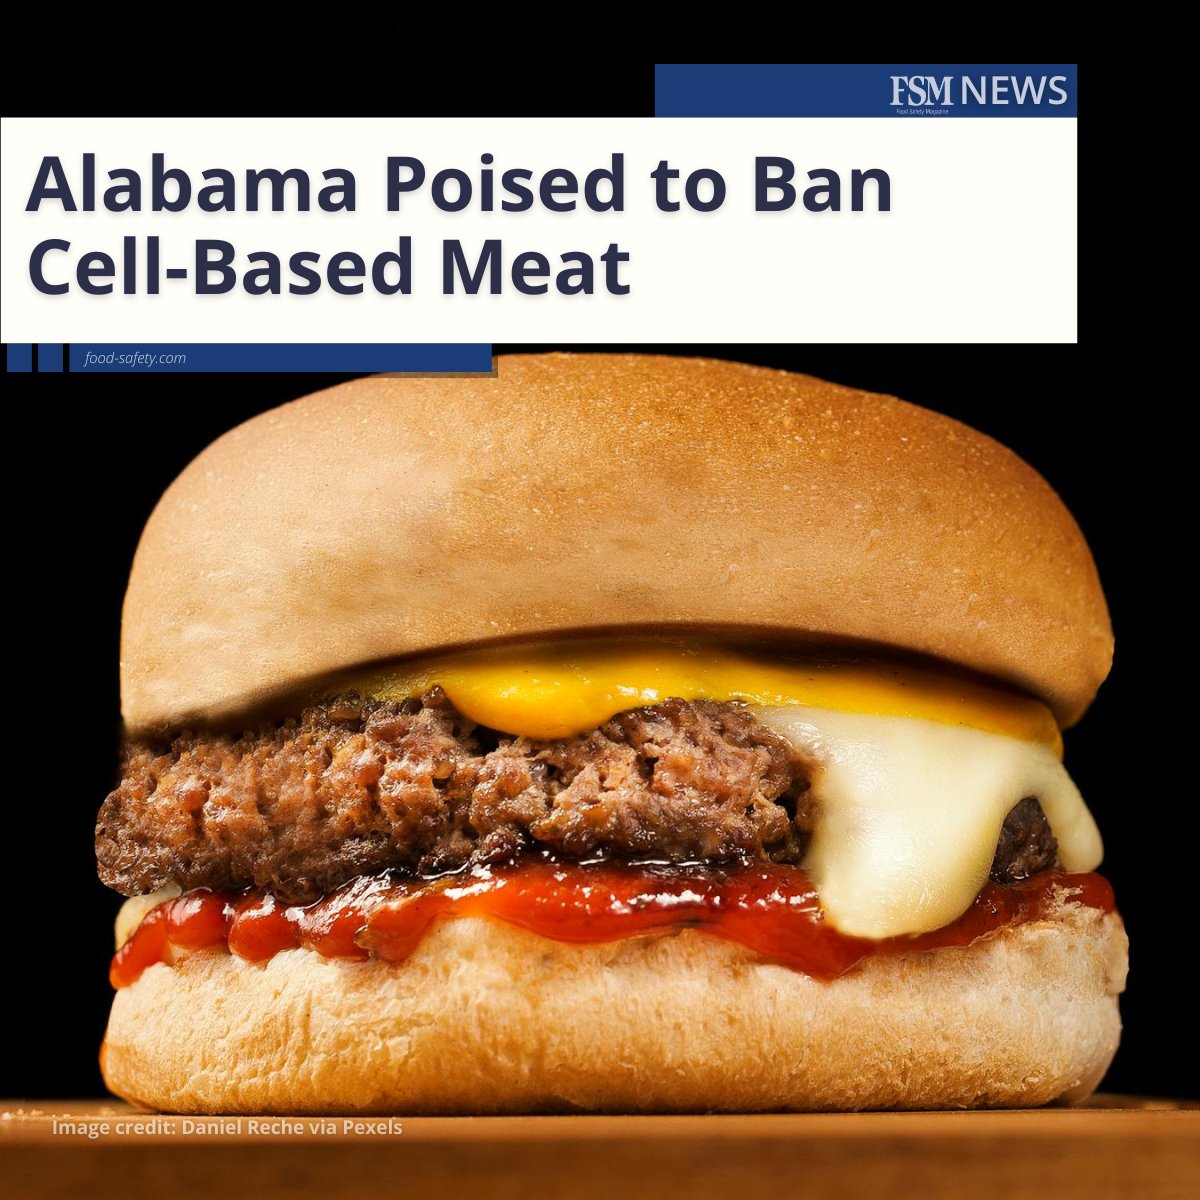 The Alabama House recently passed SB23 banning the production or sale of cell-based meat products in the state. The bill has been returned to the Senate for concurrence. 👉 brnw.ch/21wJsVy

#foodsafety #foodlaw #cellbasedmeat #cultivatedmeat #labgrownmeat #Alabama